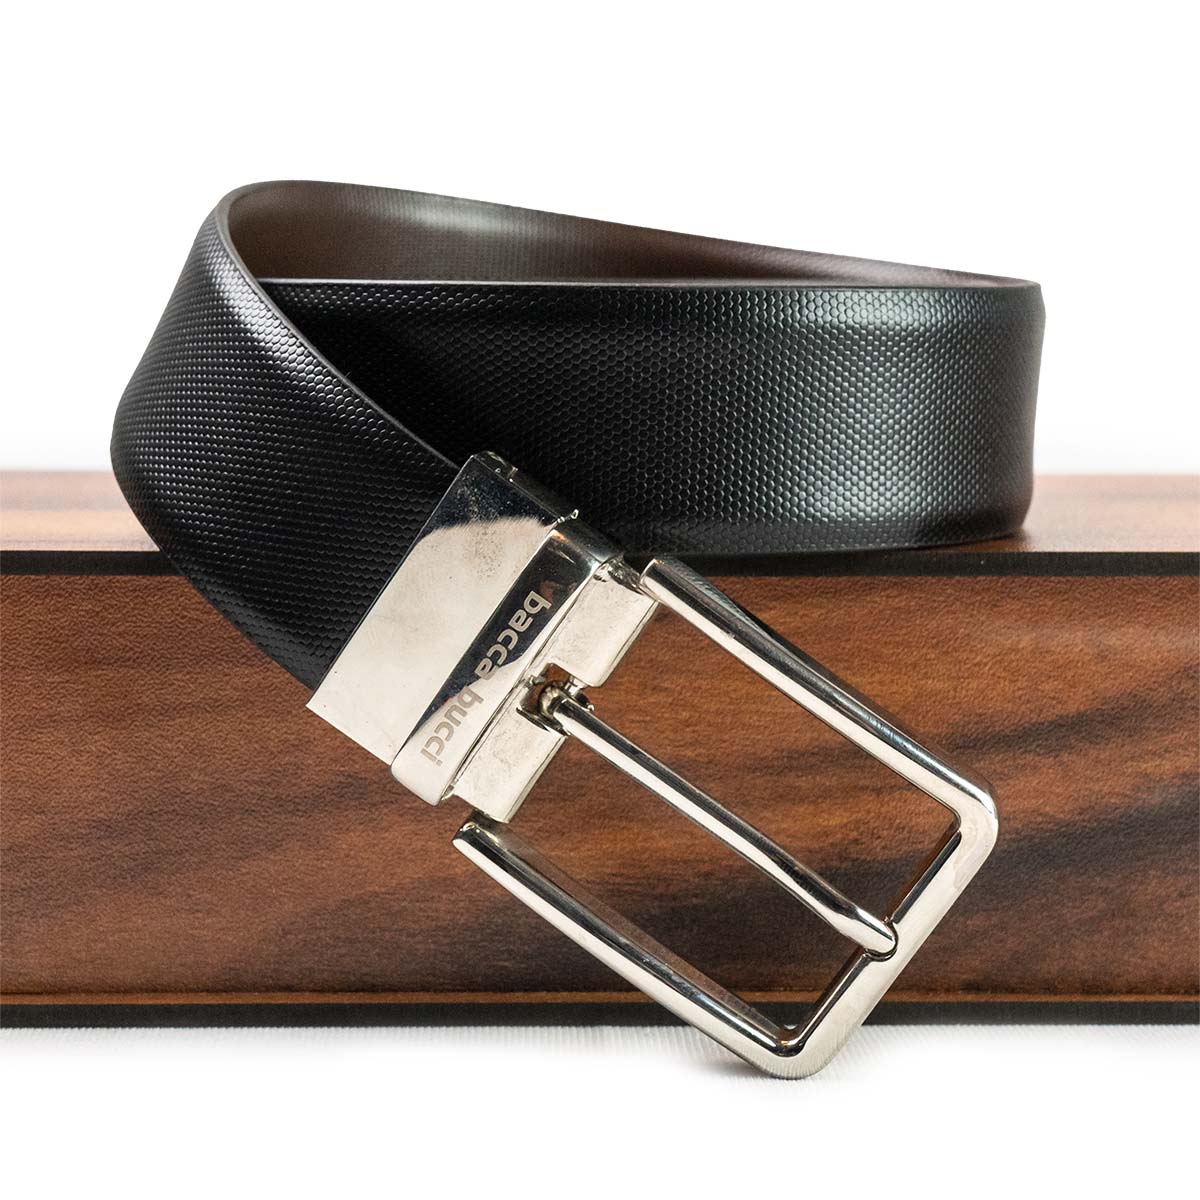 Men's Classic Reversible Dress belt with Genuine leather & Genuine soft Leather Wallet combo Gift Set for Men